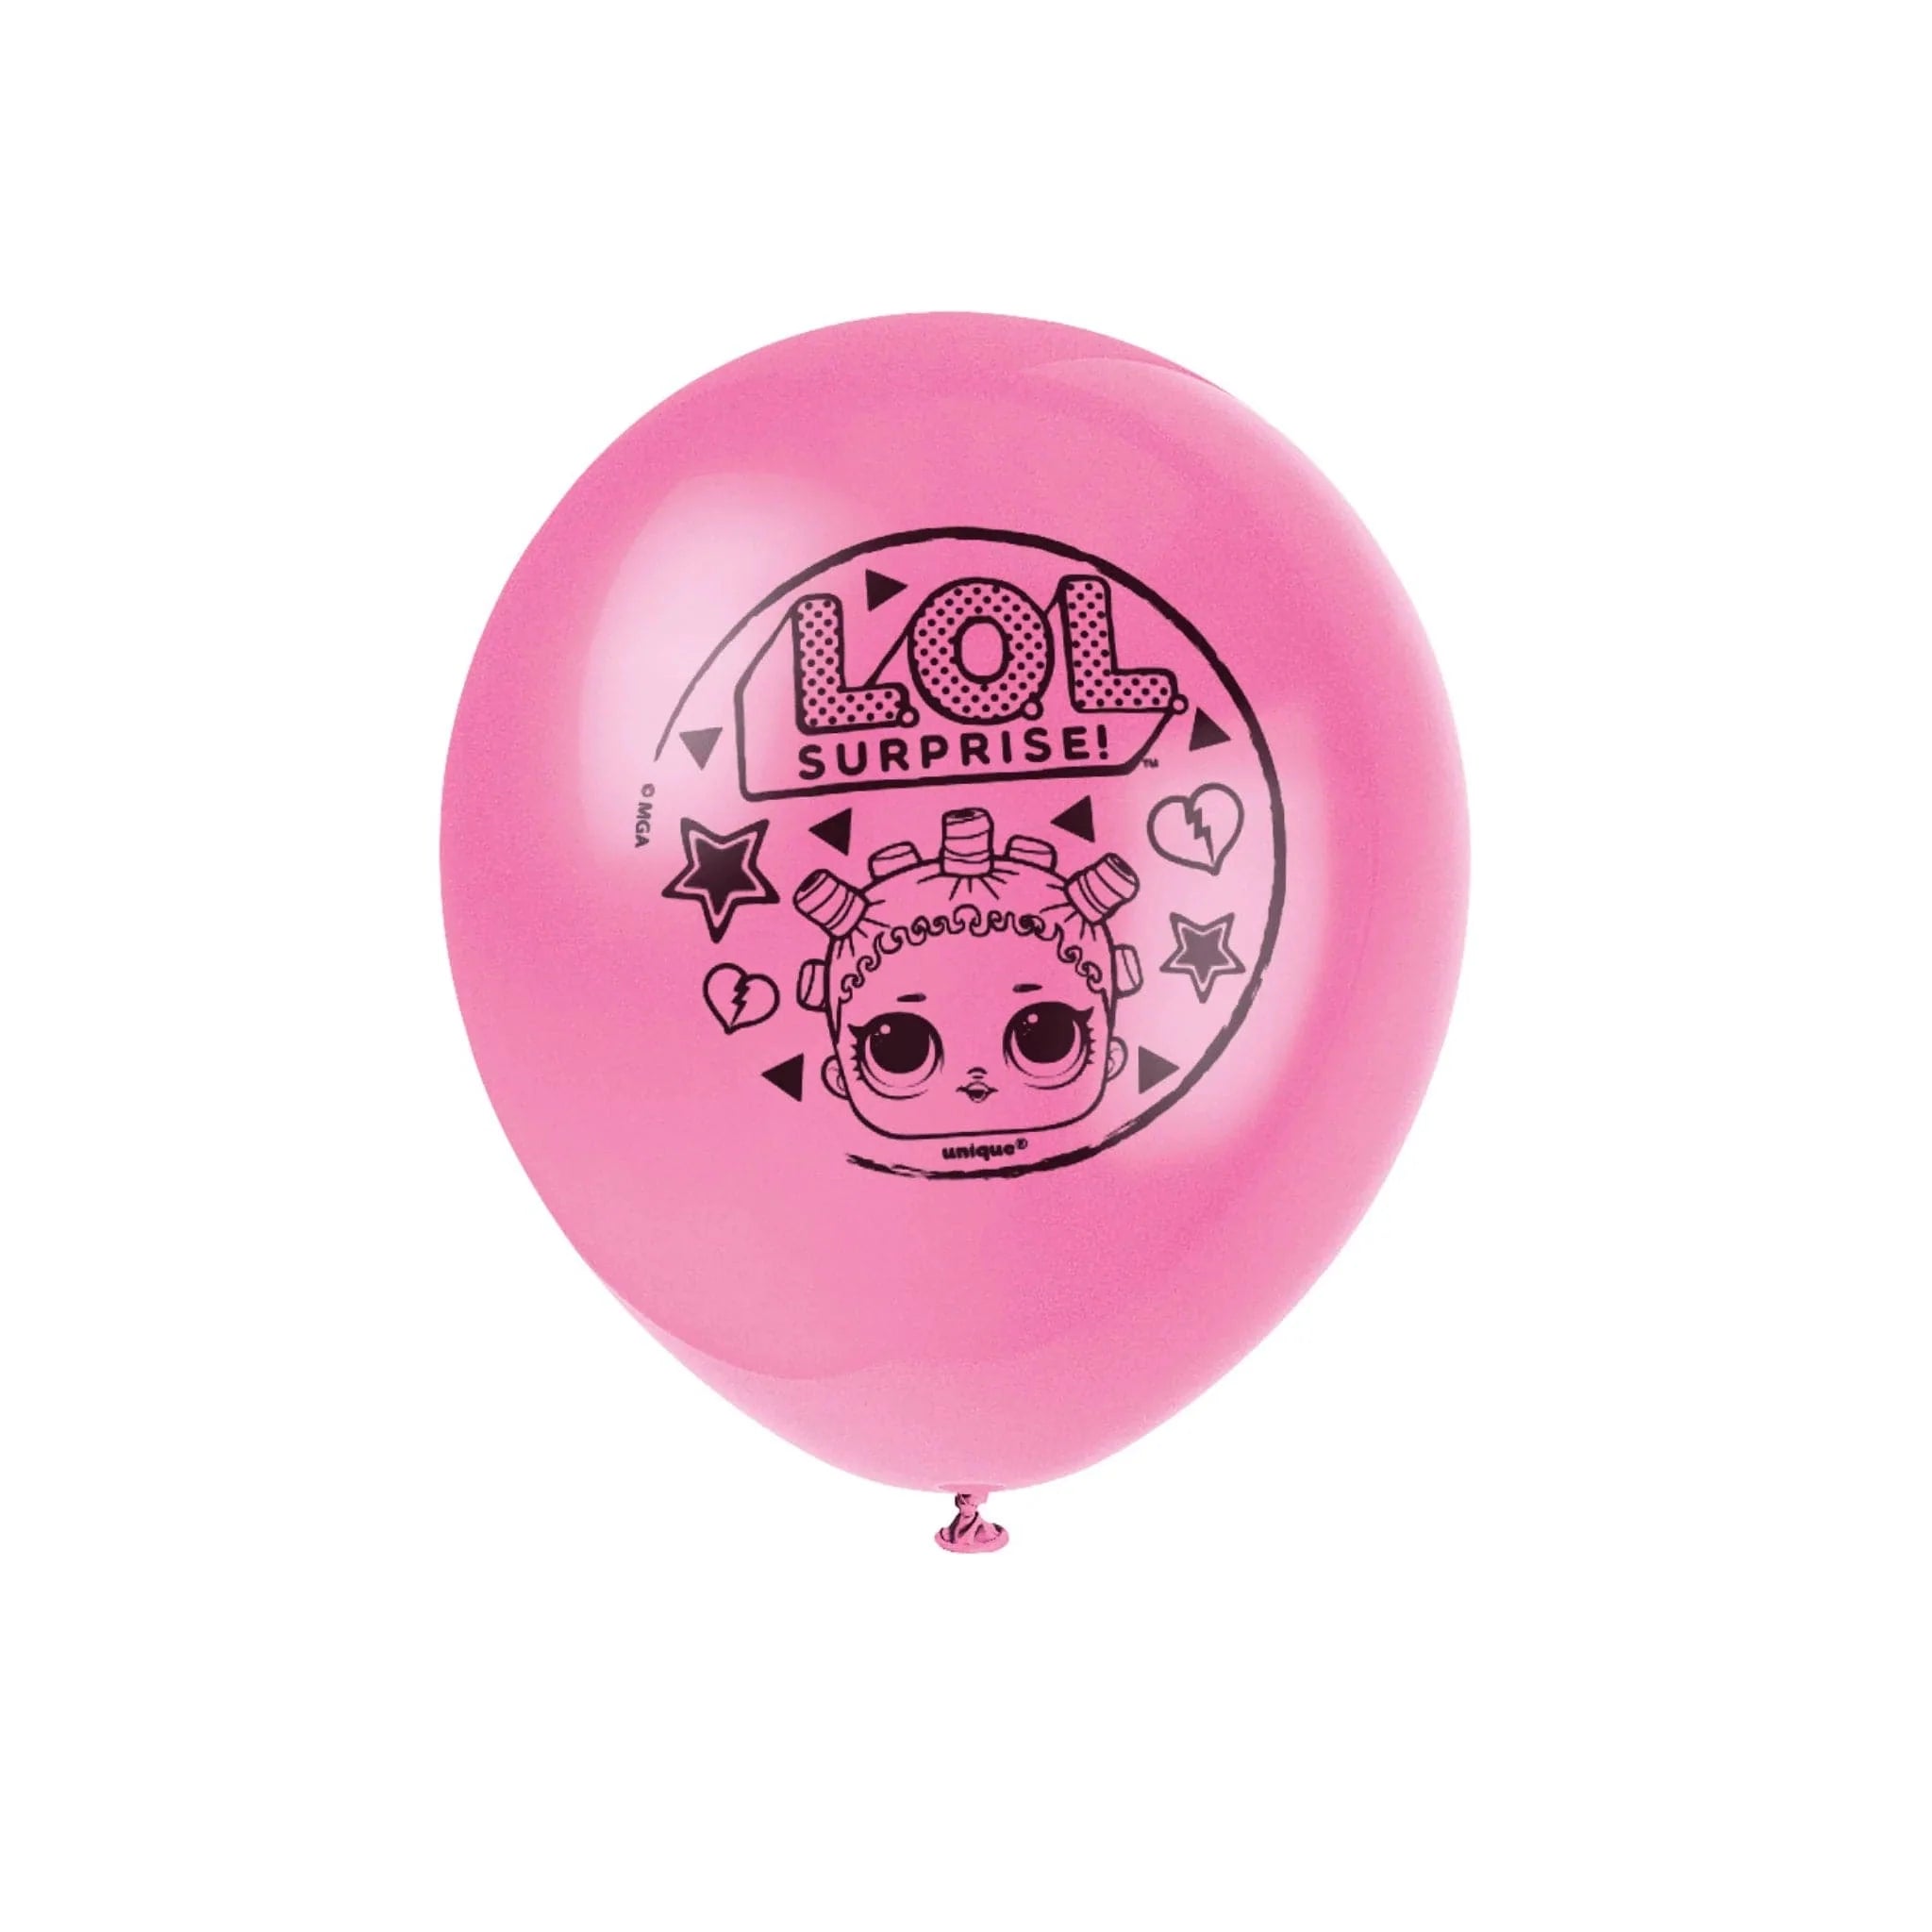 LOL Surprise 12" Latex Balloons 8pk - Kids Party Craft